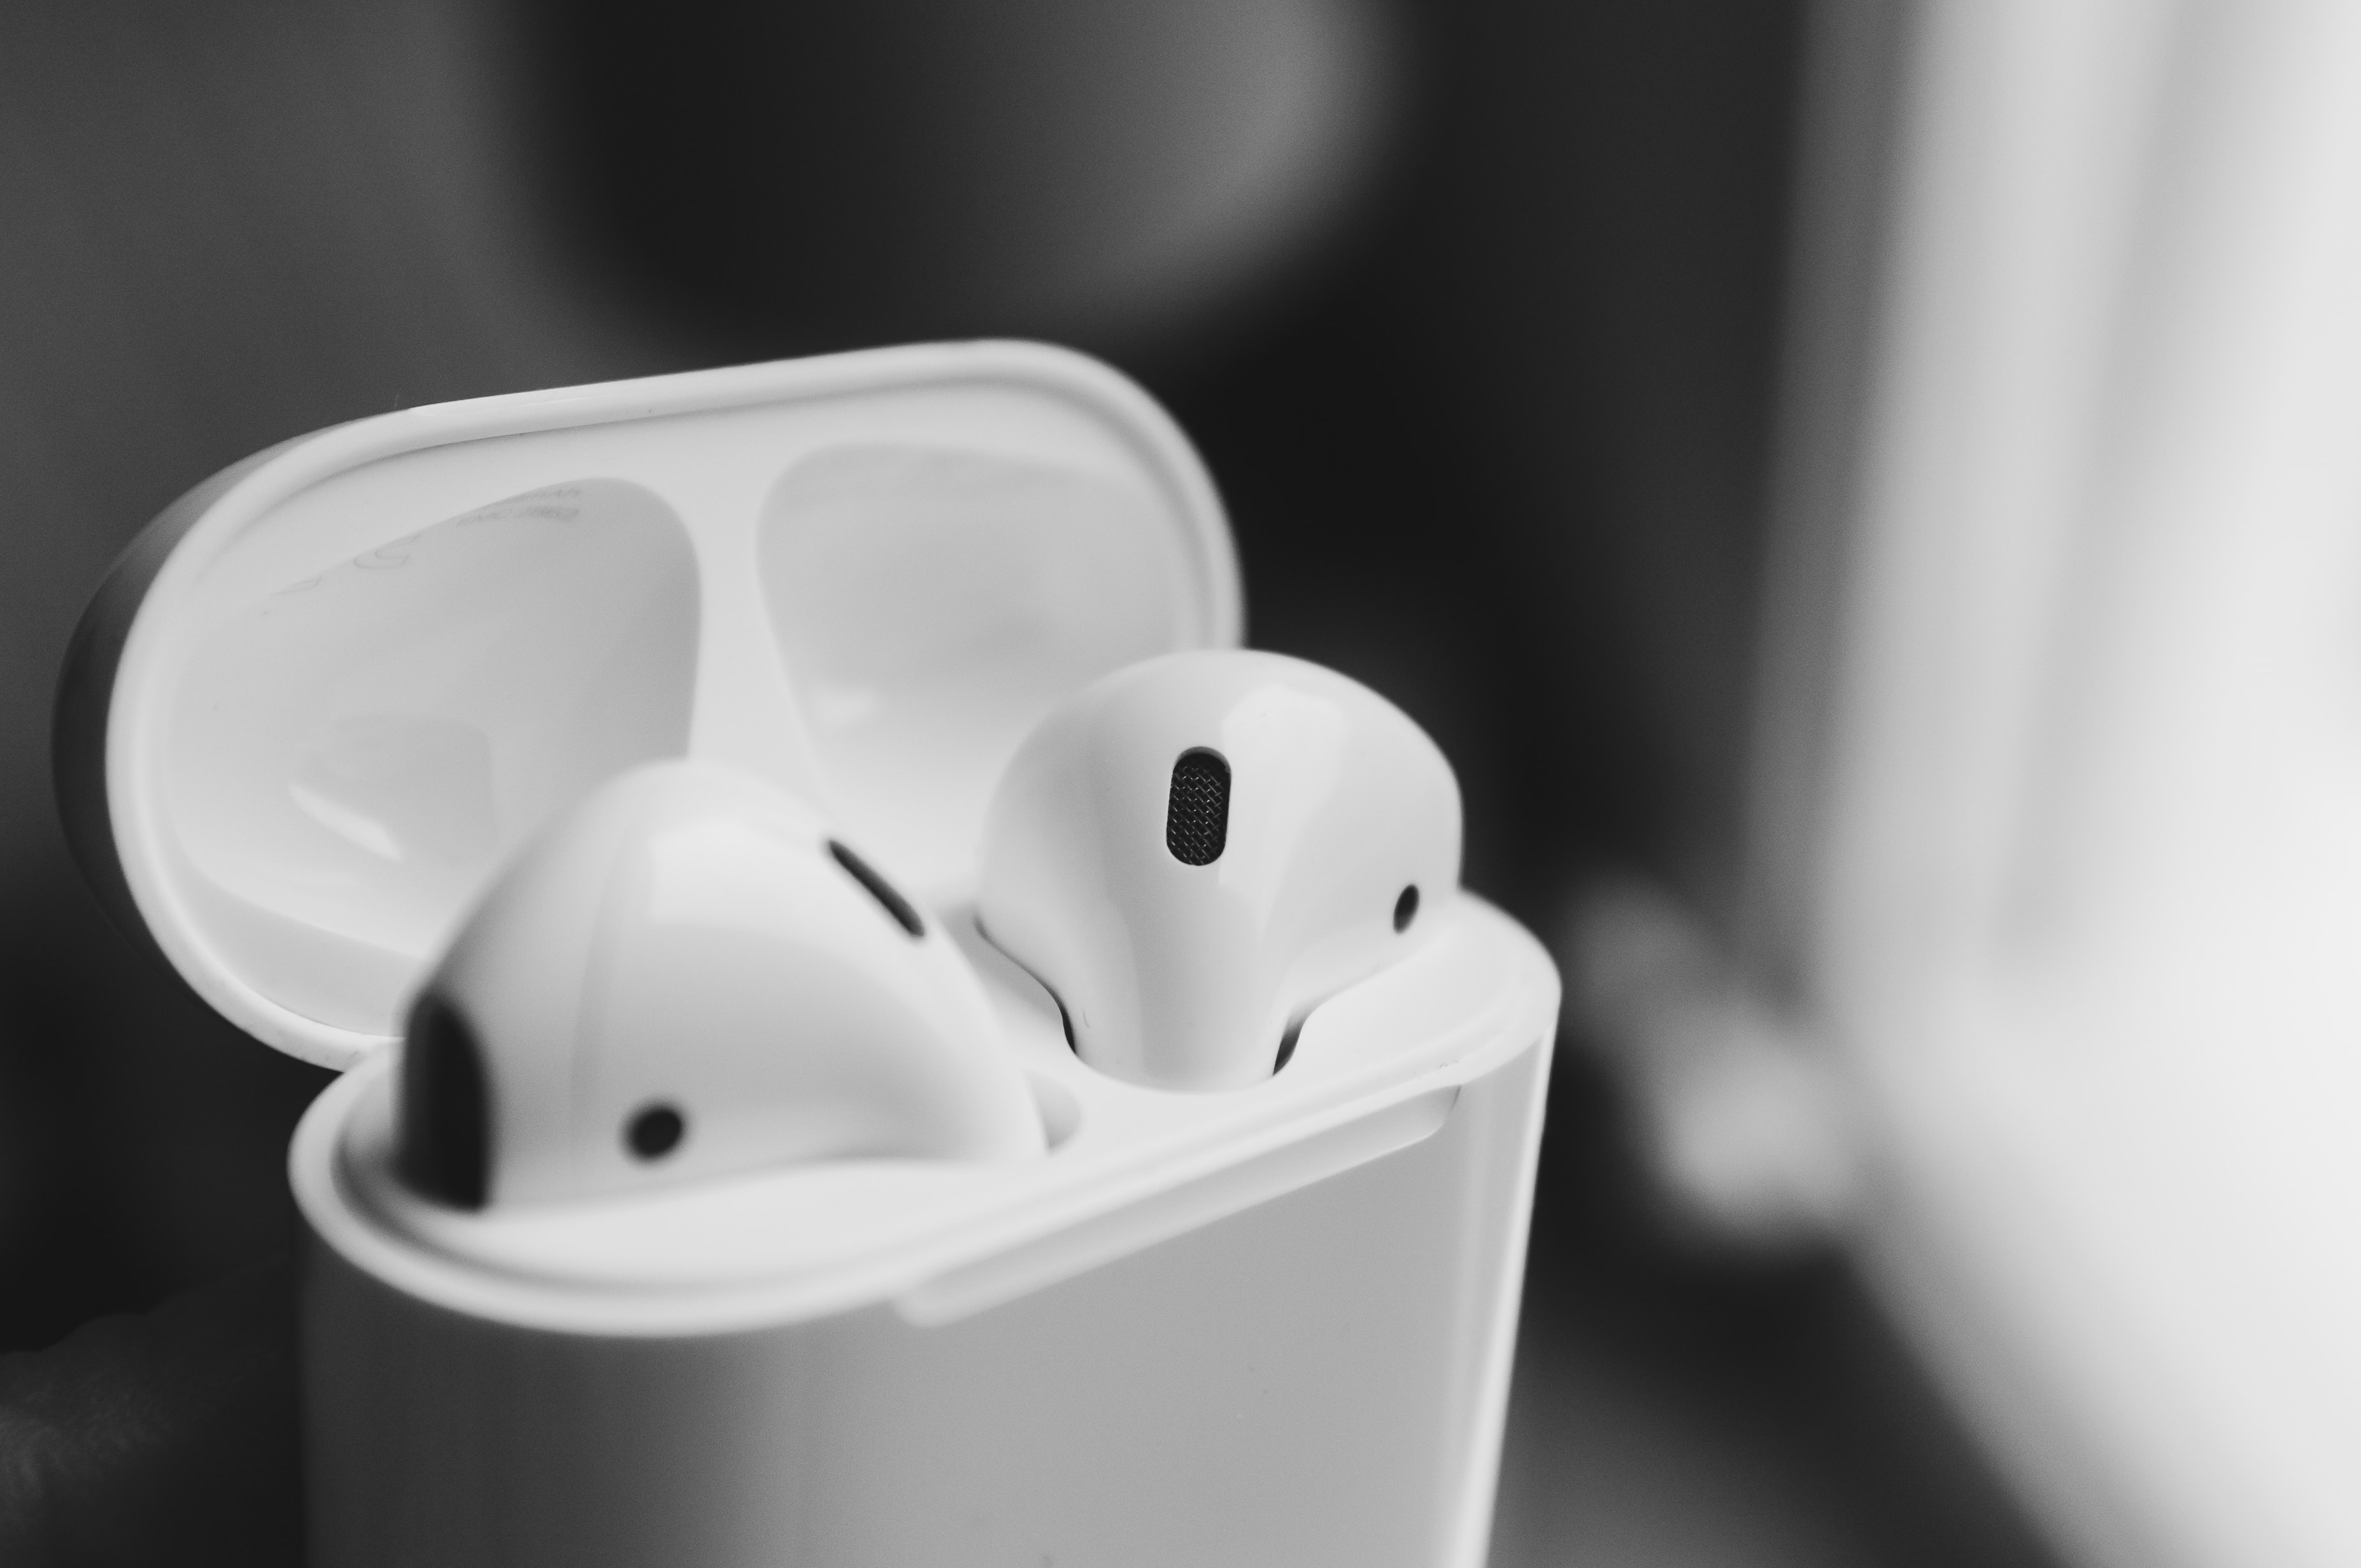 20% off all AirPods – AirPods from $129 & AirPods Pro $200